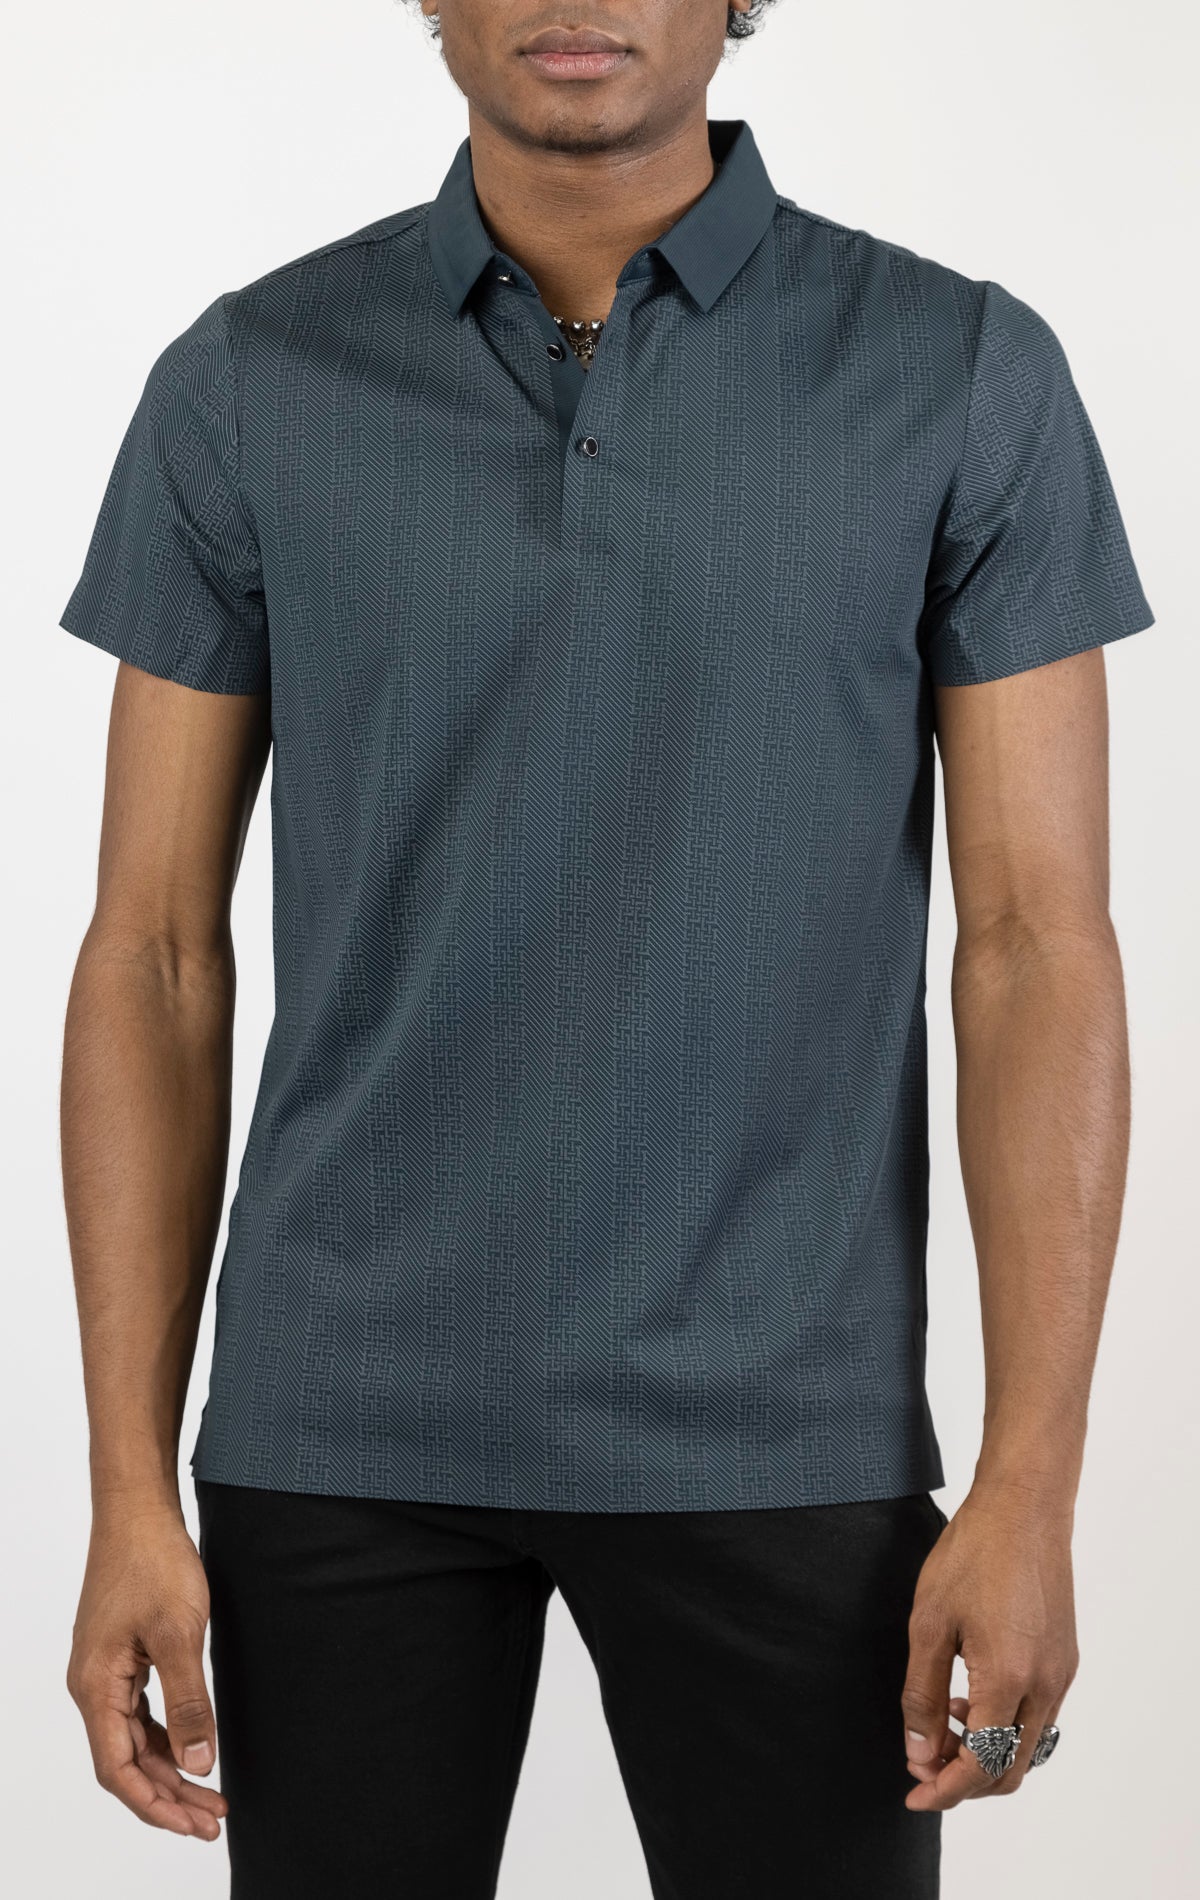 Men's versatile stretch polo shirt in navy. The polo is made from an 87% nylon, 13% spandex blend and features a seamless pattern design, a classic polo collar with buttons, and short sleeves.